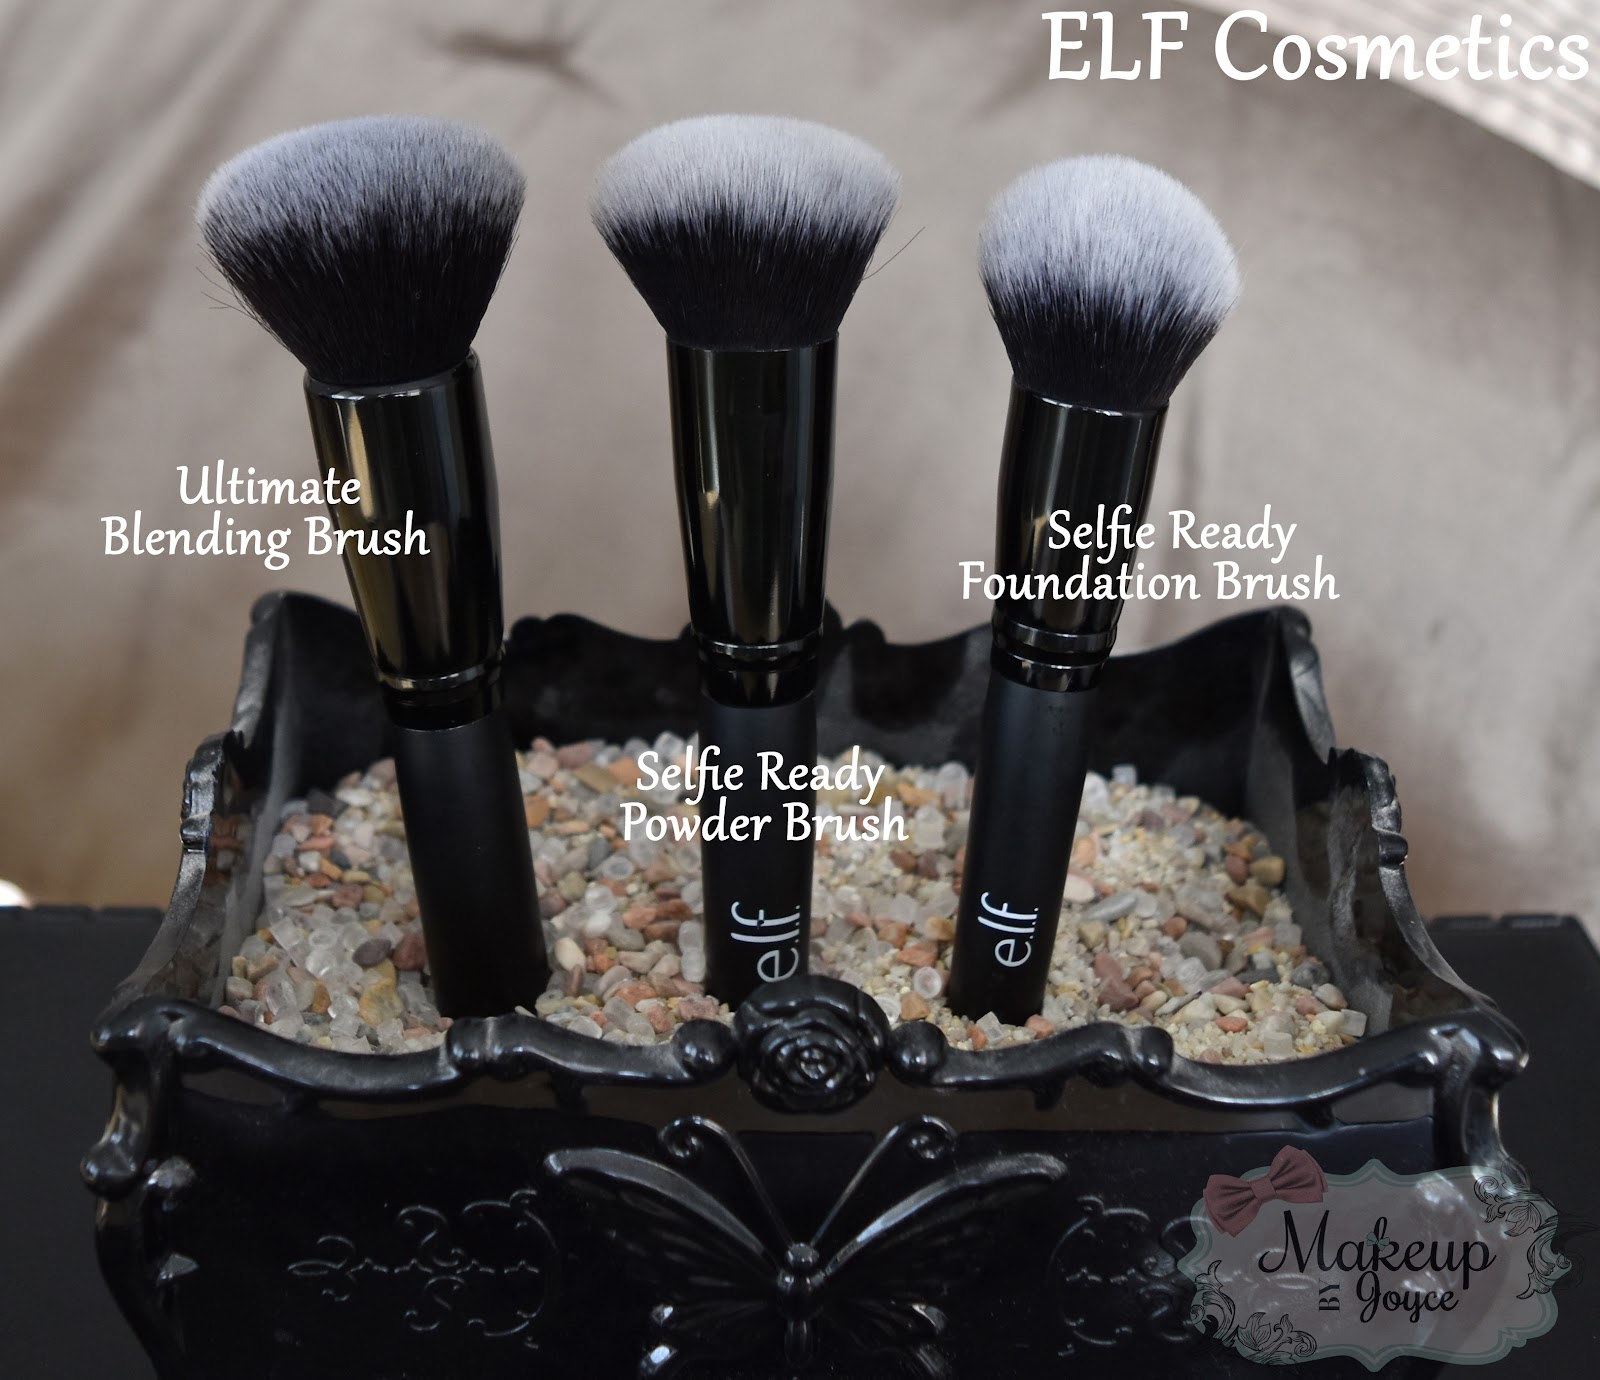 ❤ MakeupByJoyce ❤** !: Review: ELF Cosmetics Selfie Ready and the Ultimate  Blending Brush